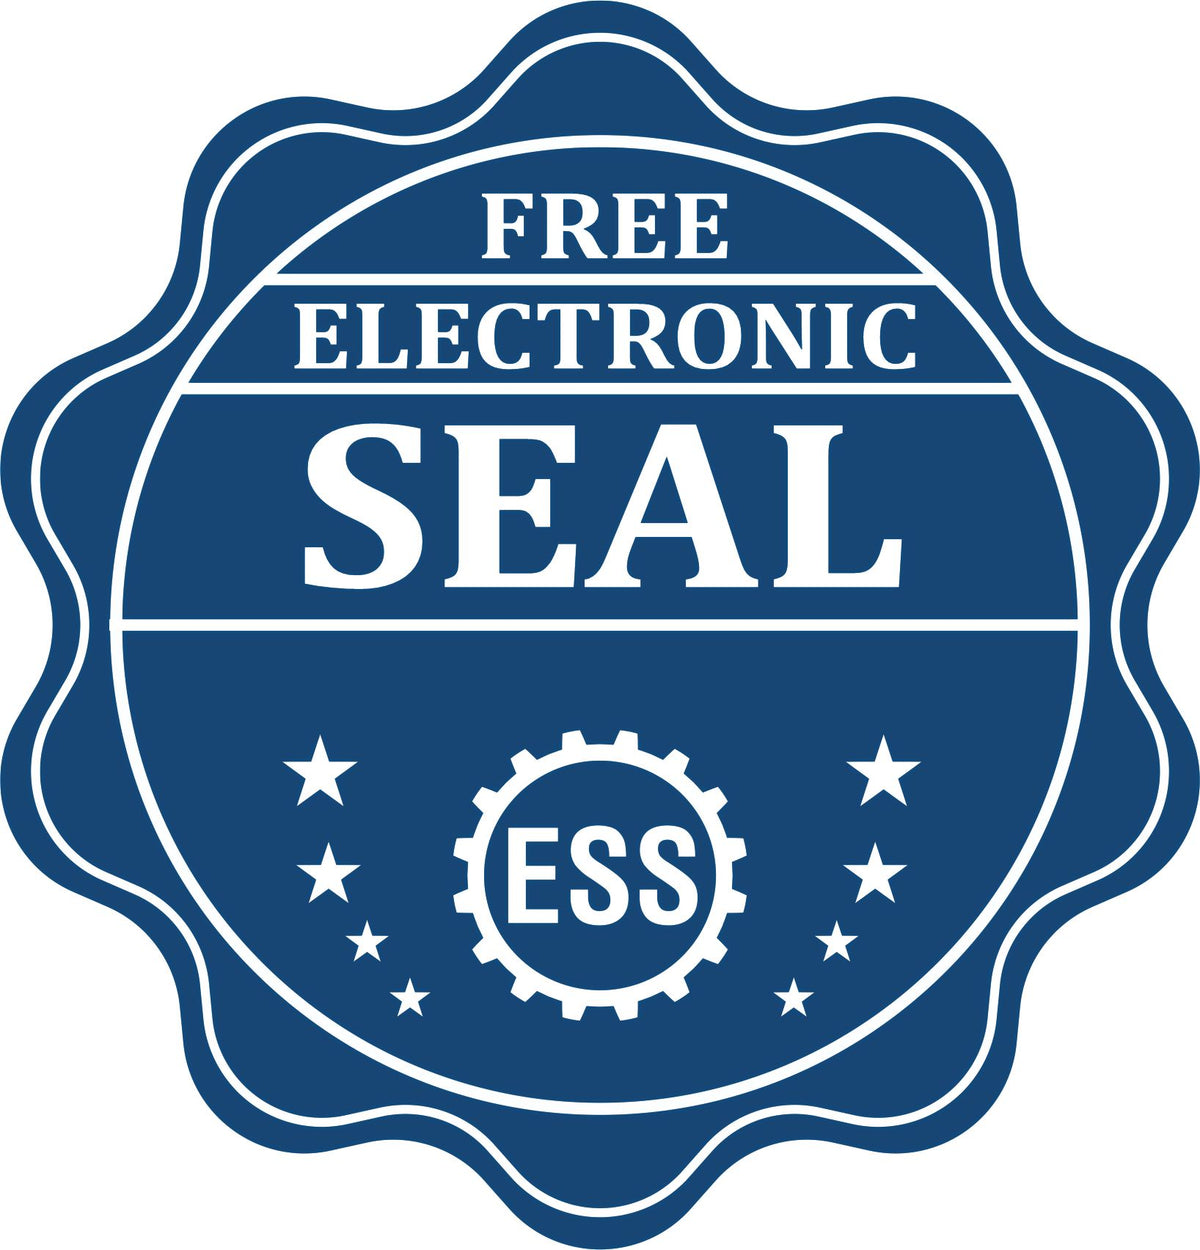 A badge showing a free electronic seal for the Heavy Duty Cast Iron Wyoming Geologist Seal Embosser with stars and the ESS gear on the emblem.